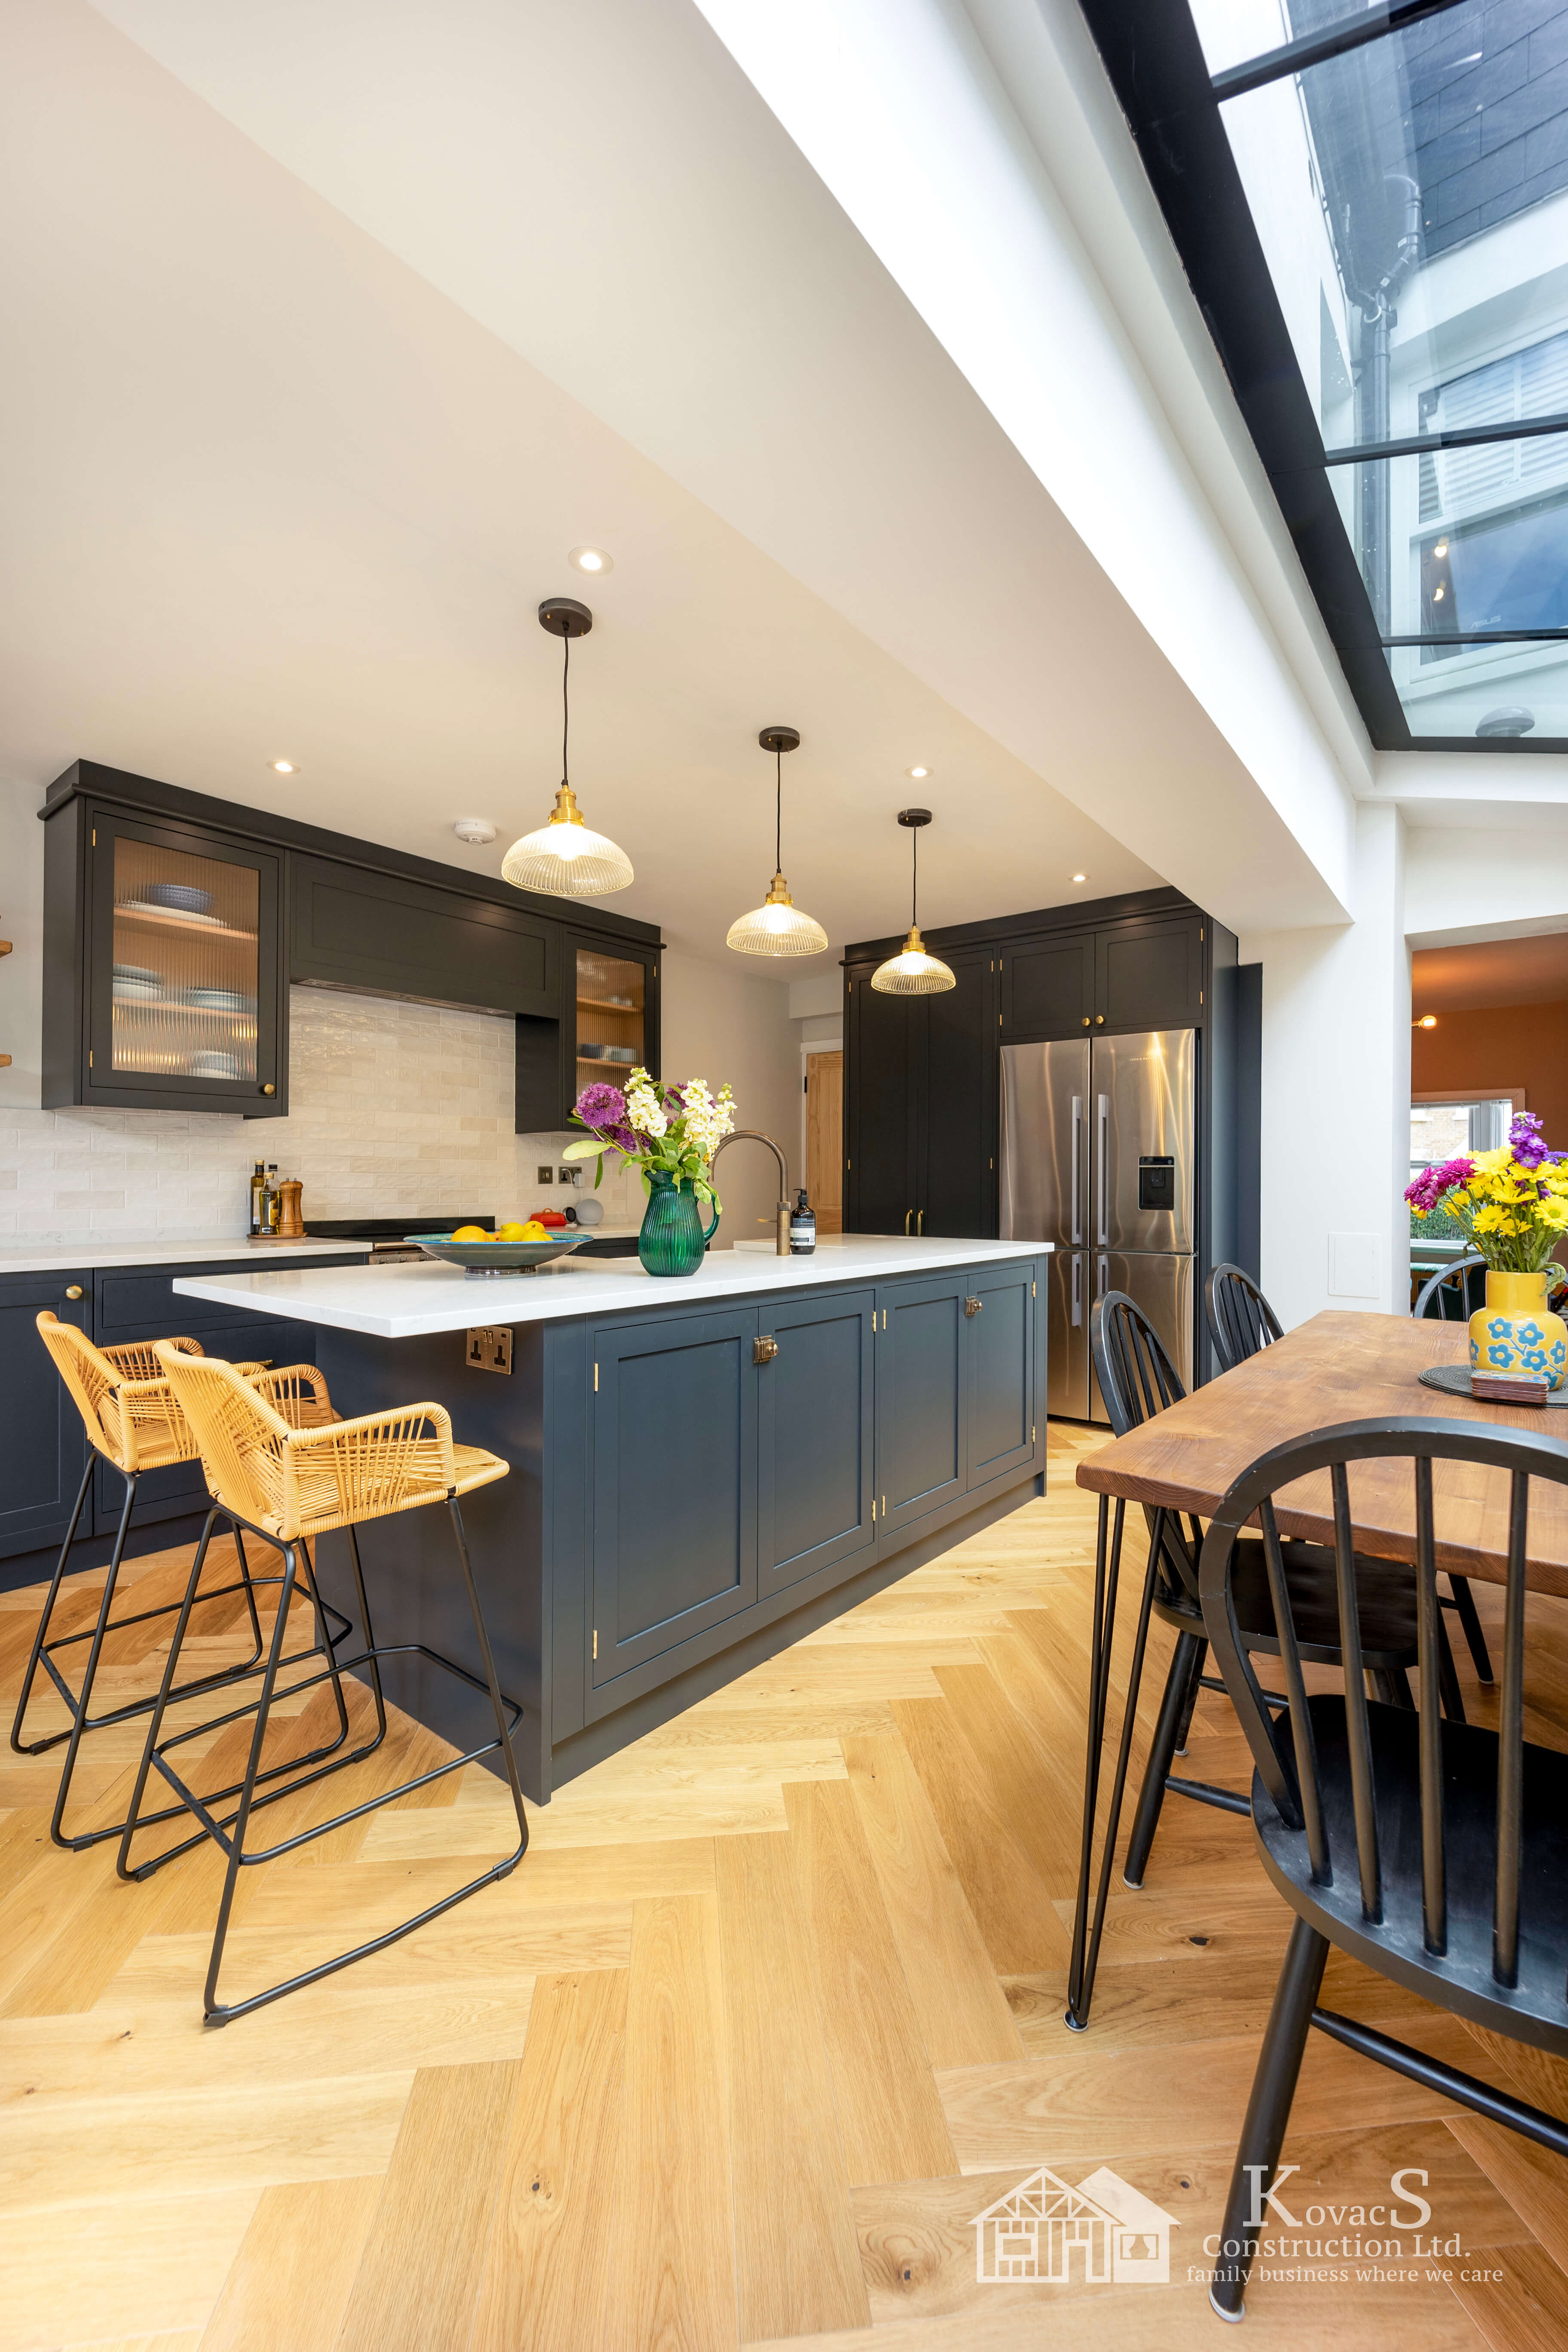 Unlocking Hidden Potential with Kovacs Construction part II: The Benefits of Kitchen Extensions